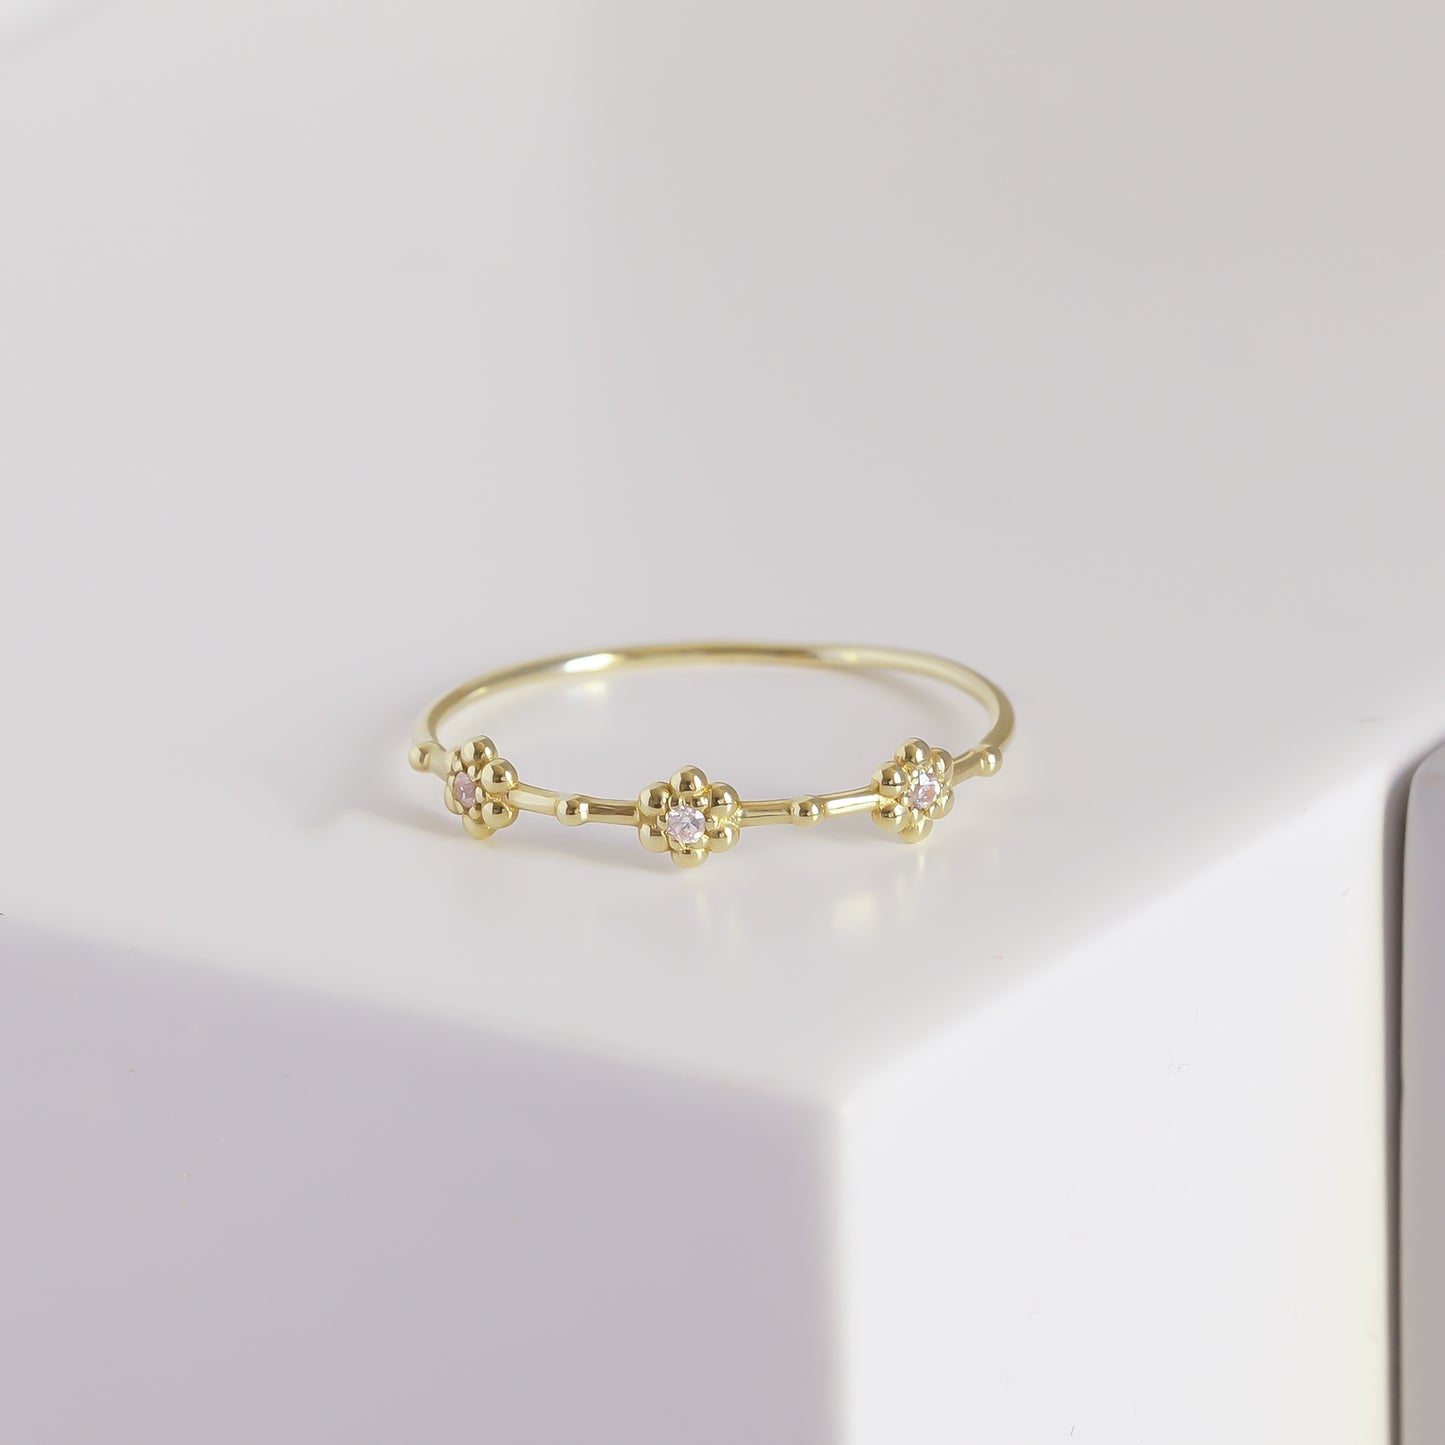 Tiny Flower Ring in 14K Solid Gold